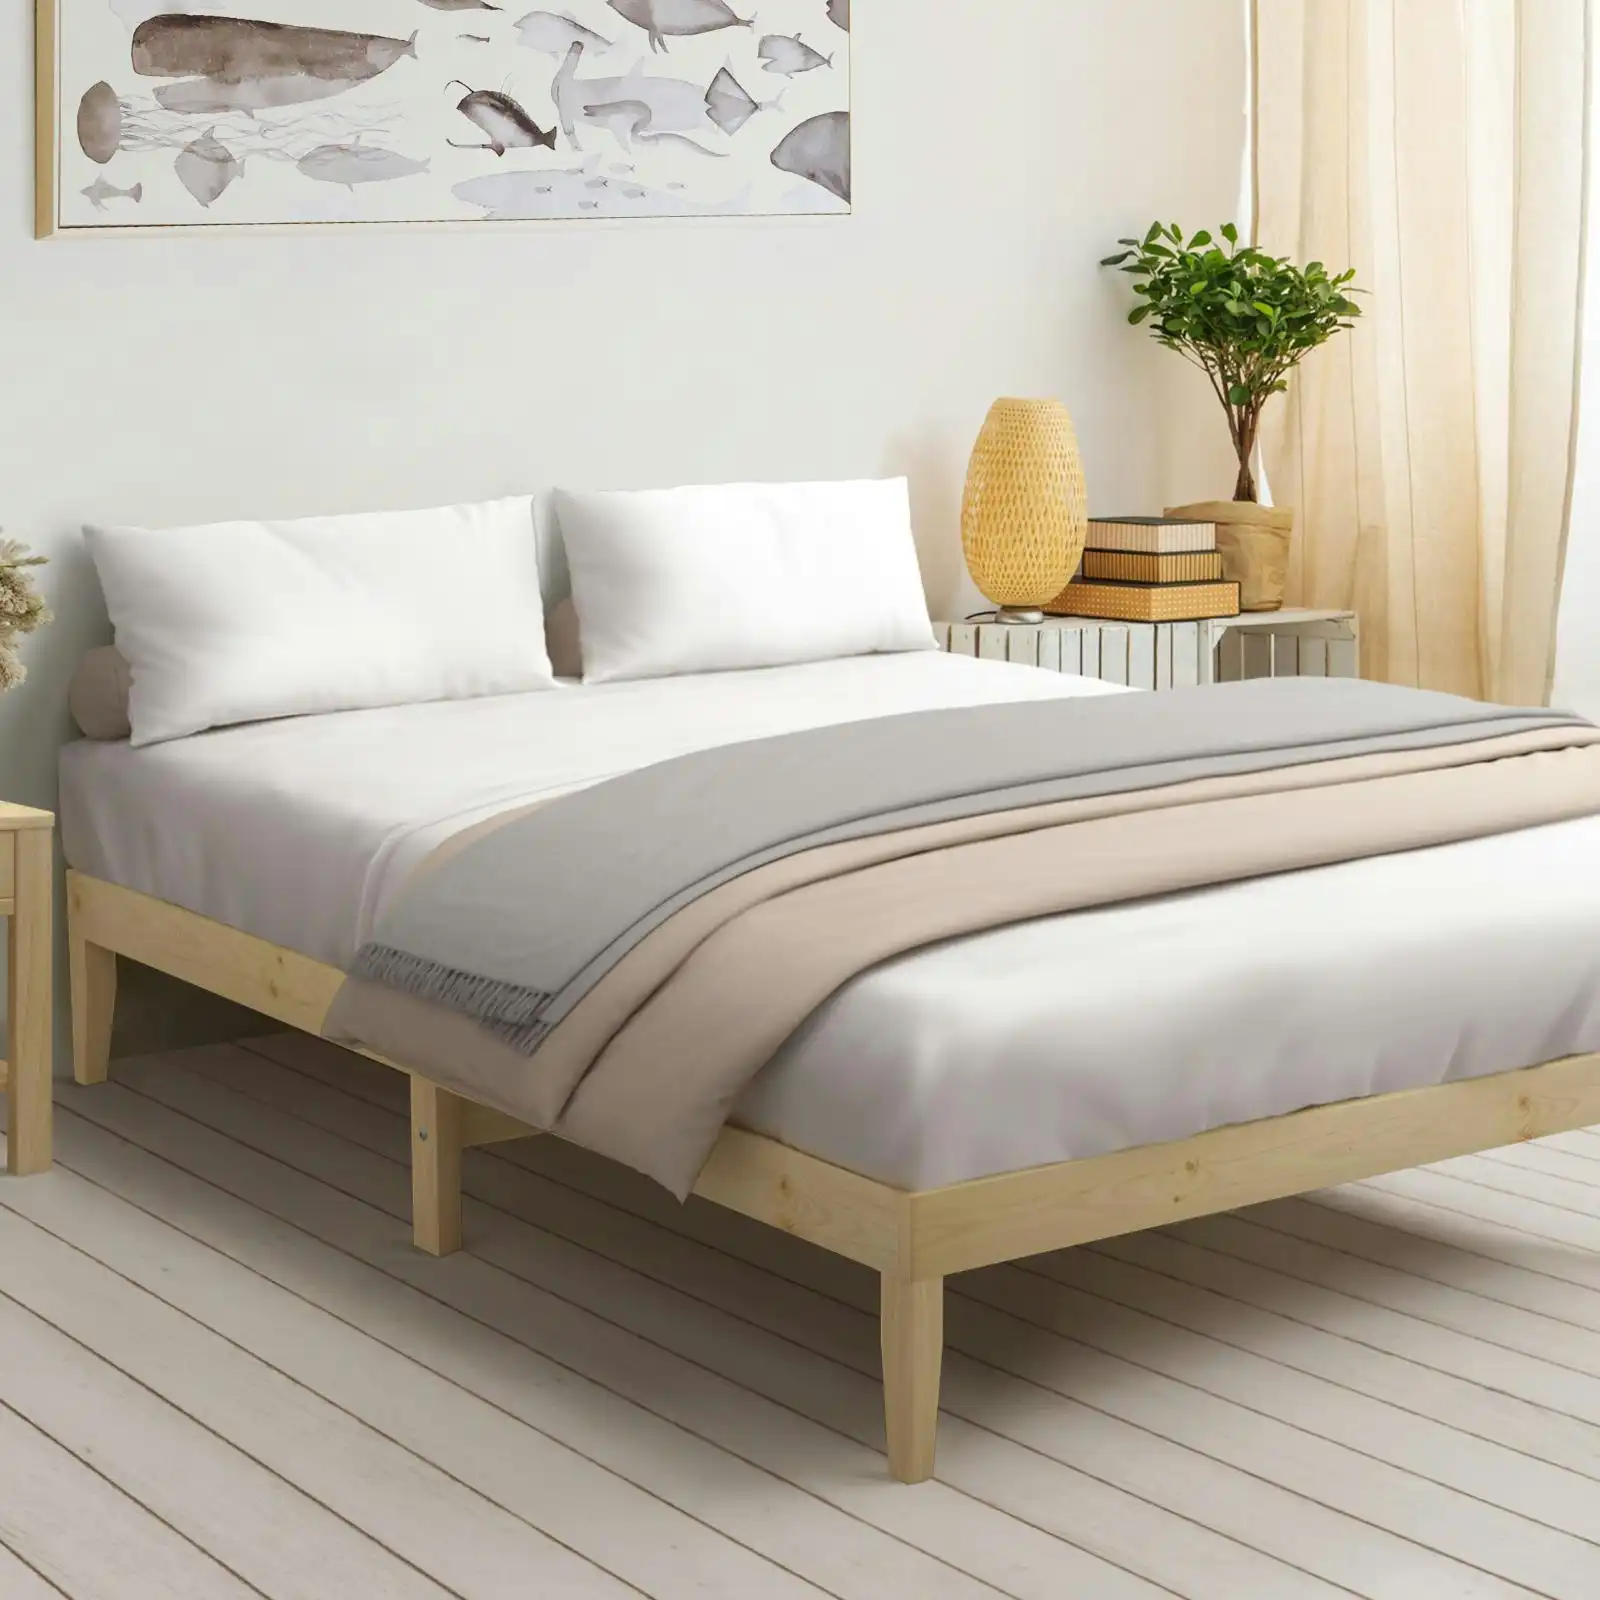 Oikiture Bed Frame Queen Size Wooden Bed Base A8